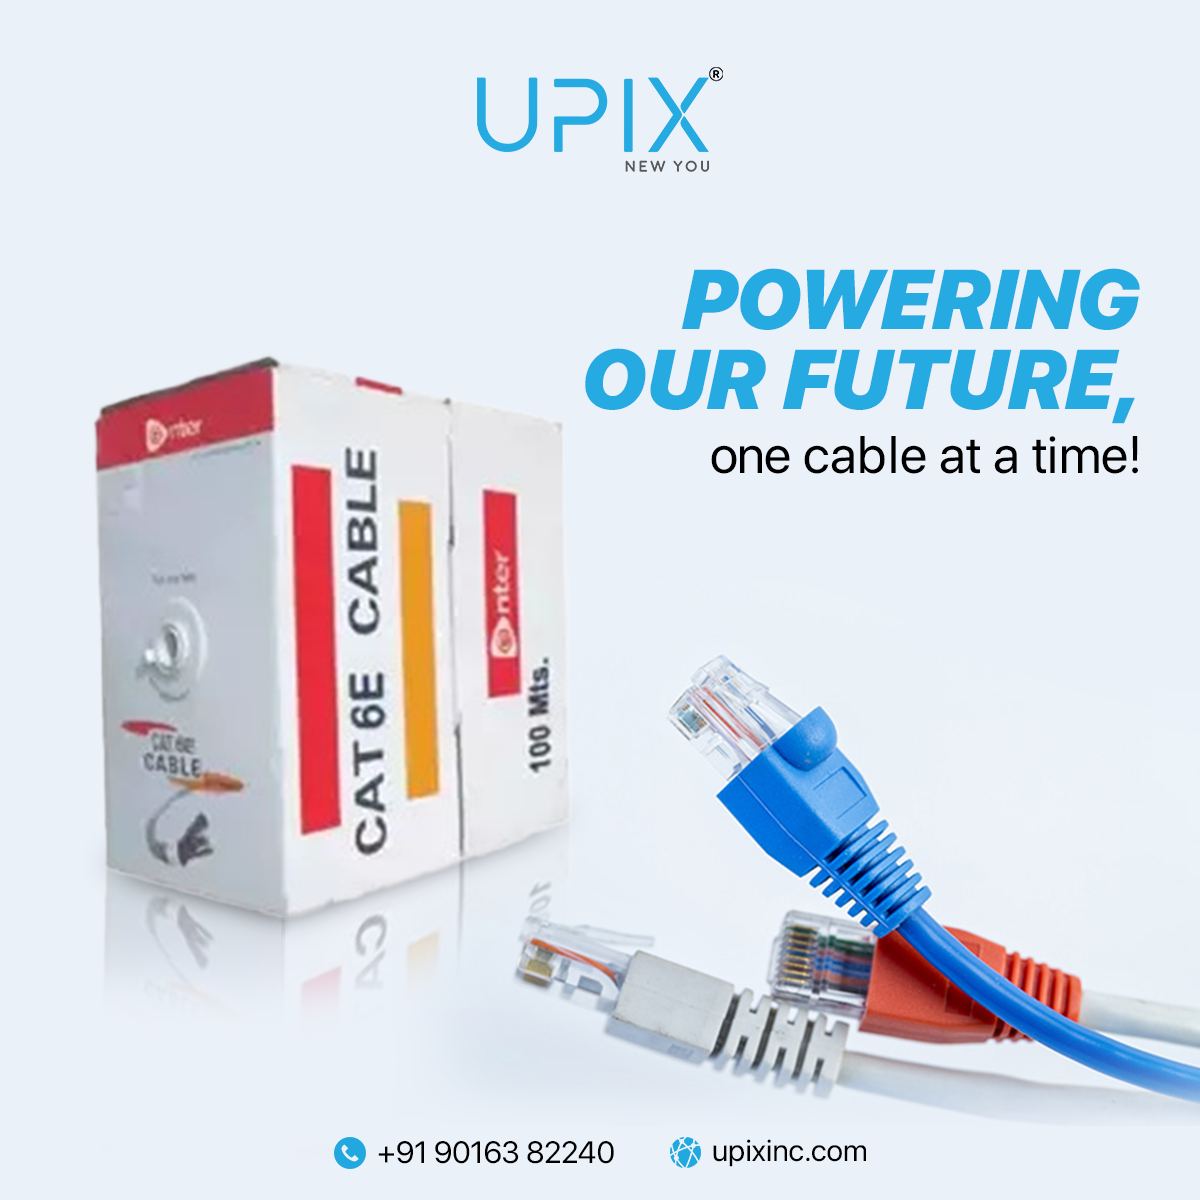 Find Faster, smoother, and more reliable connections with CAT6E cable. Check out the Upix Electronics Stores now!
.
#poojaelectronics #cat6e #electronicitems #ExpertRepairs #WeFixItAll #ElectricalSafety #TrustedRepairs #qualityservice #ElectronicsSpecialist #PowerUp